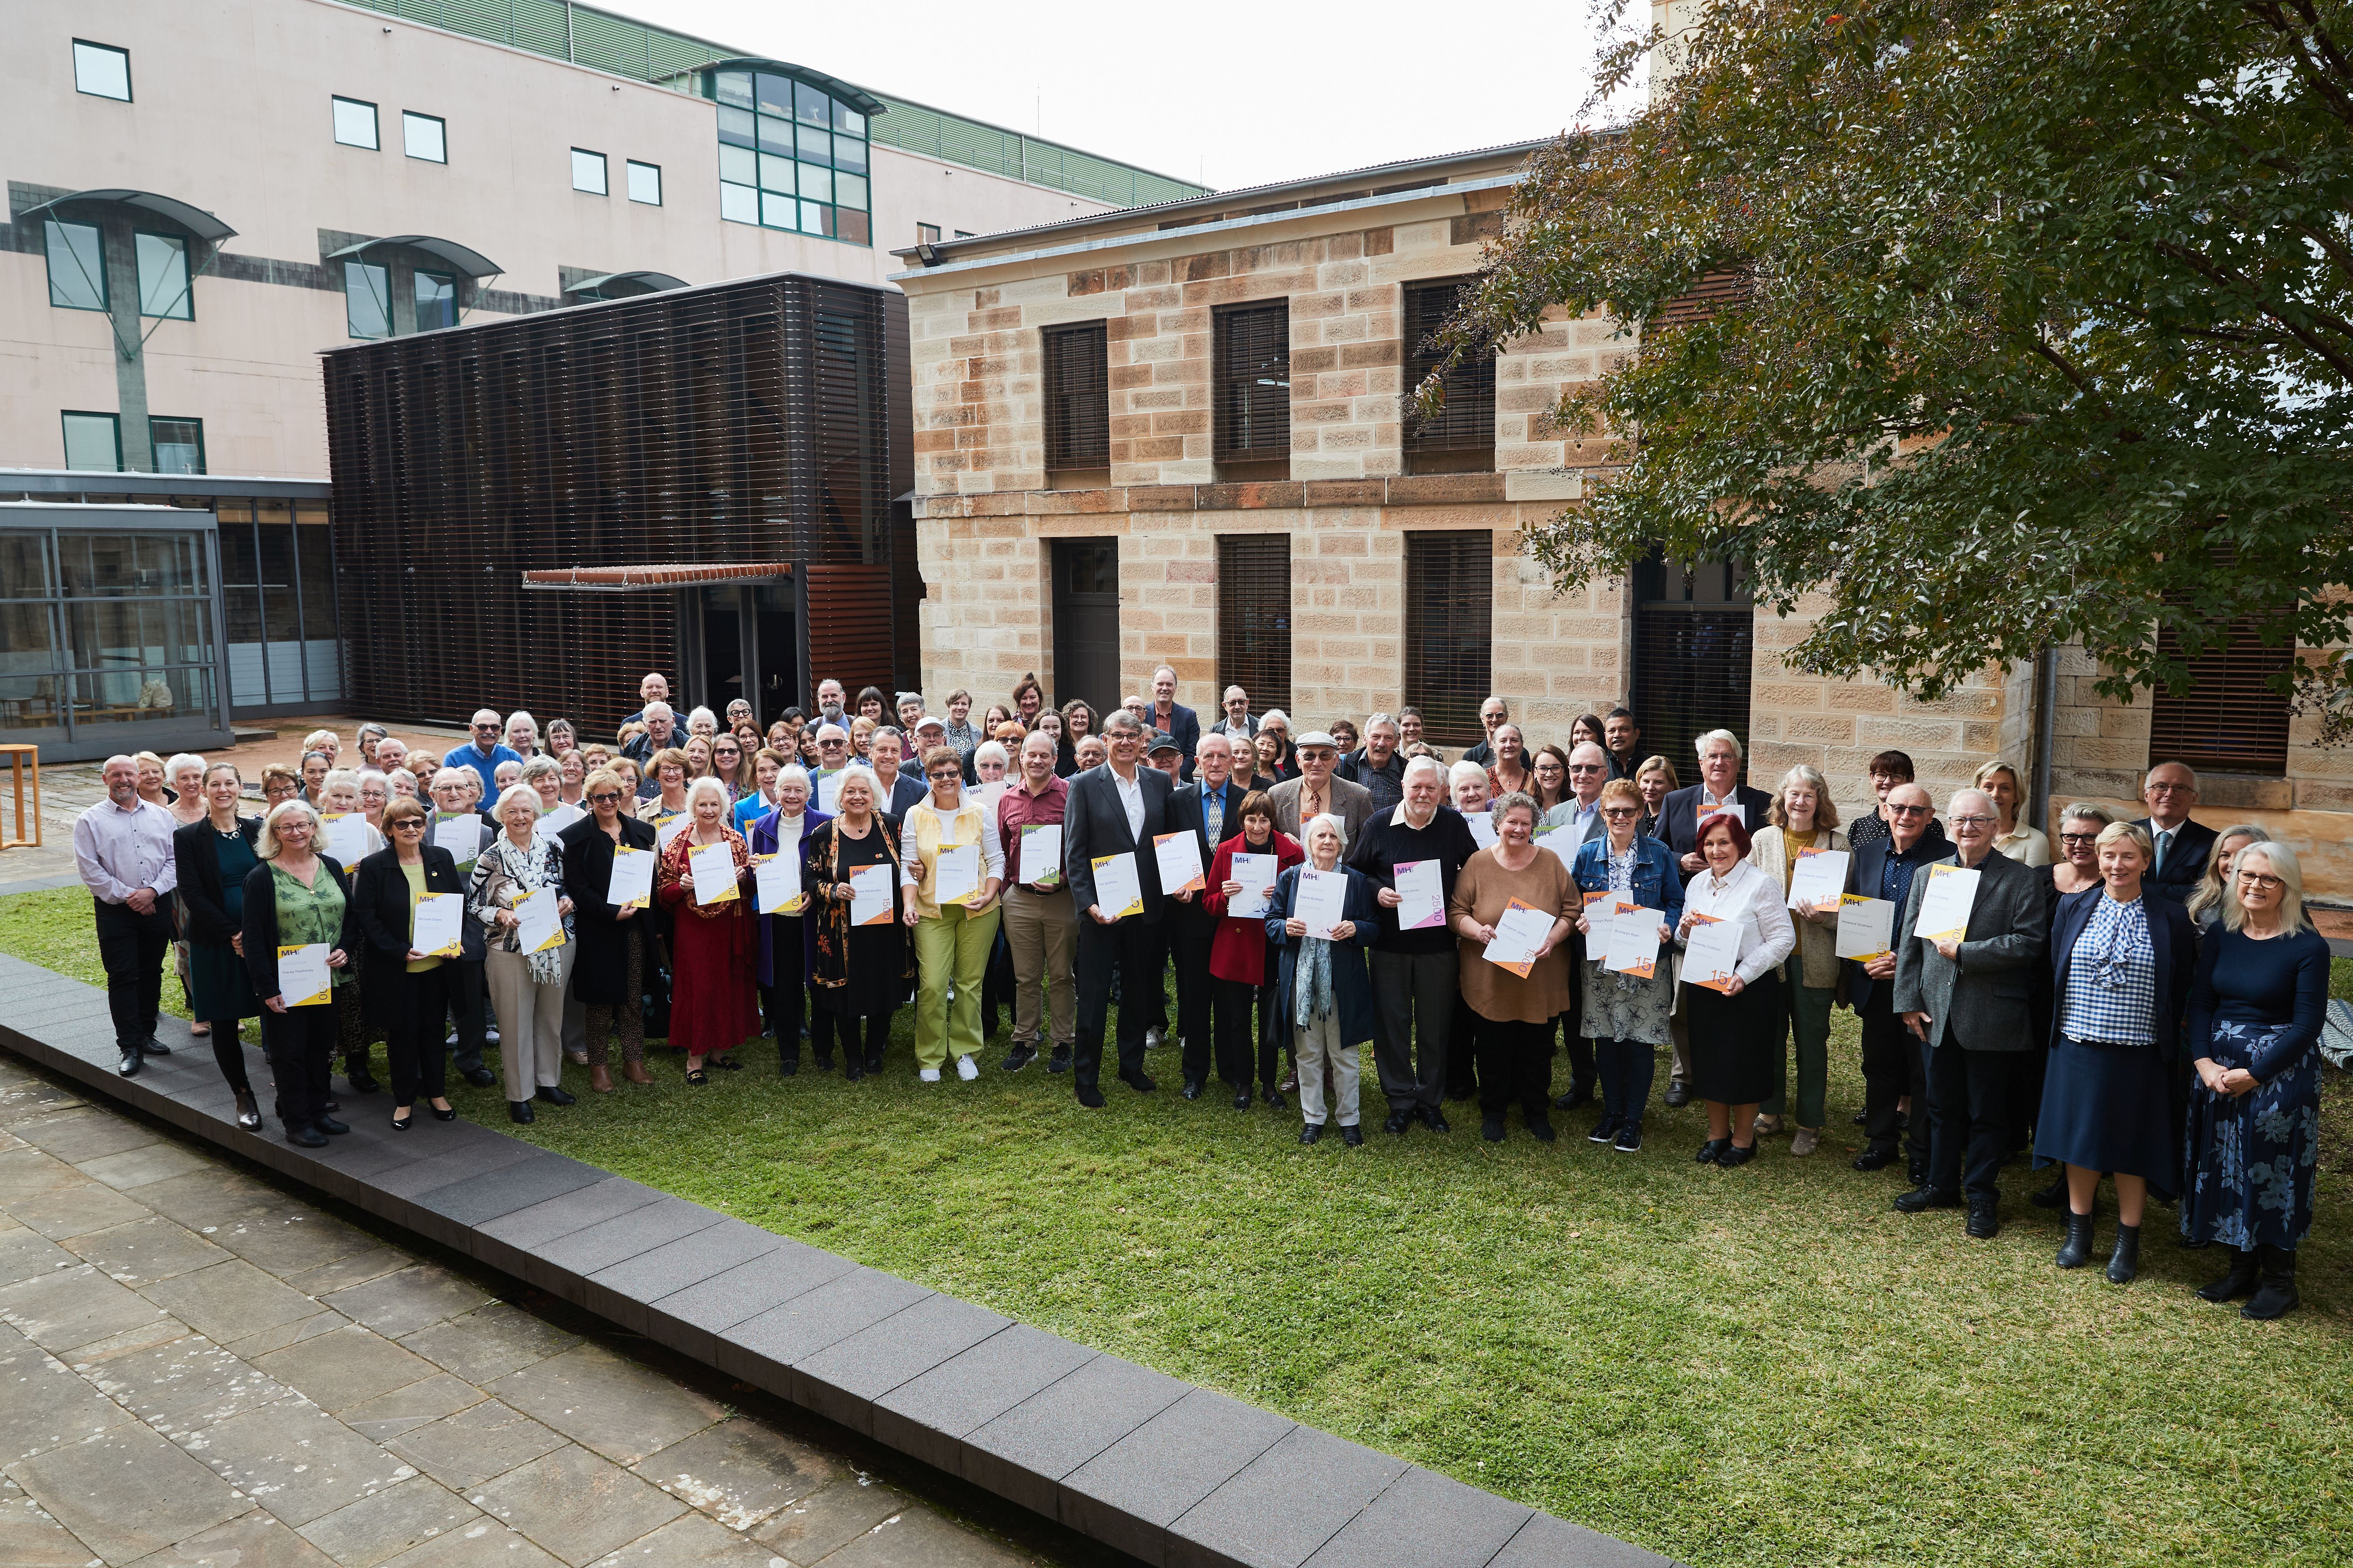 A large group photo showing the volunteer team gathered at The Mint for their annual Volunteers’ Morning Tea.